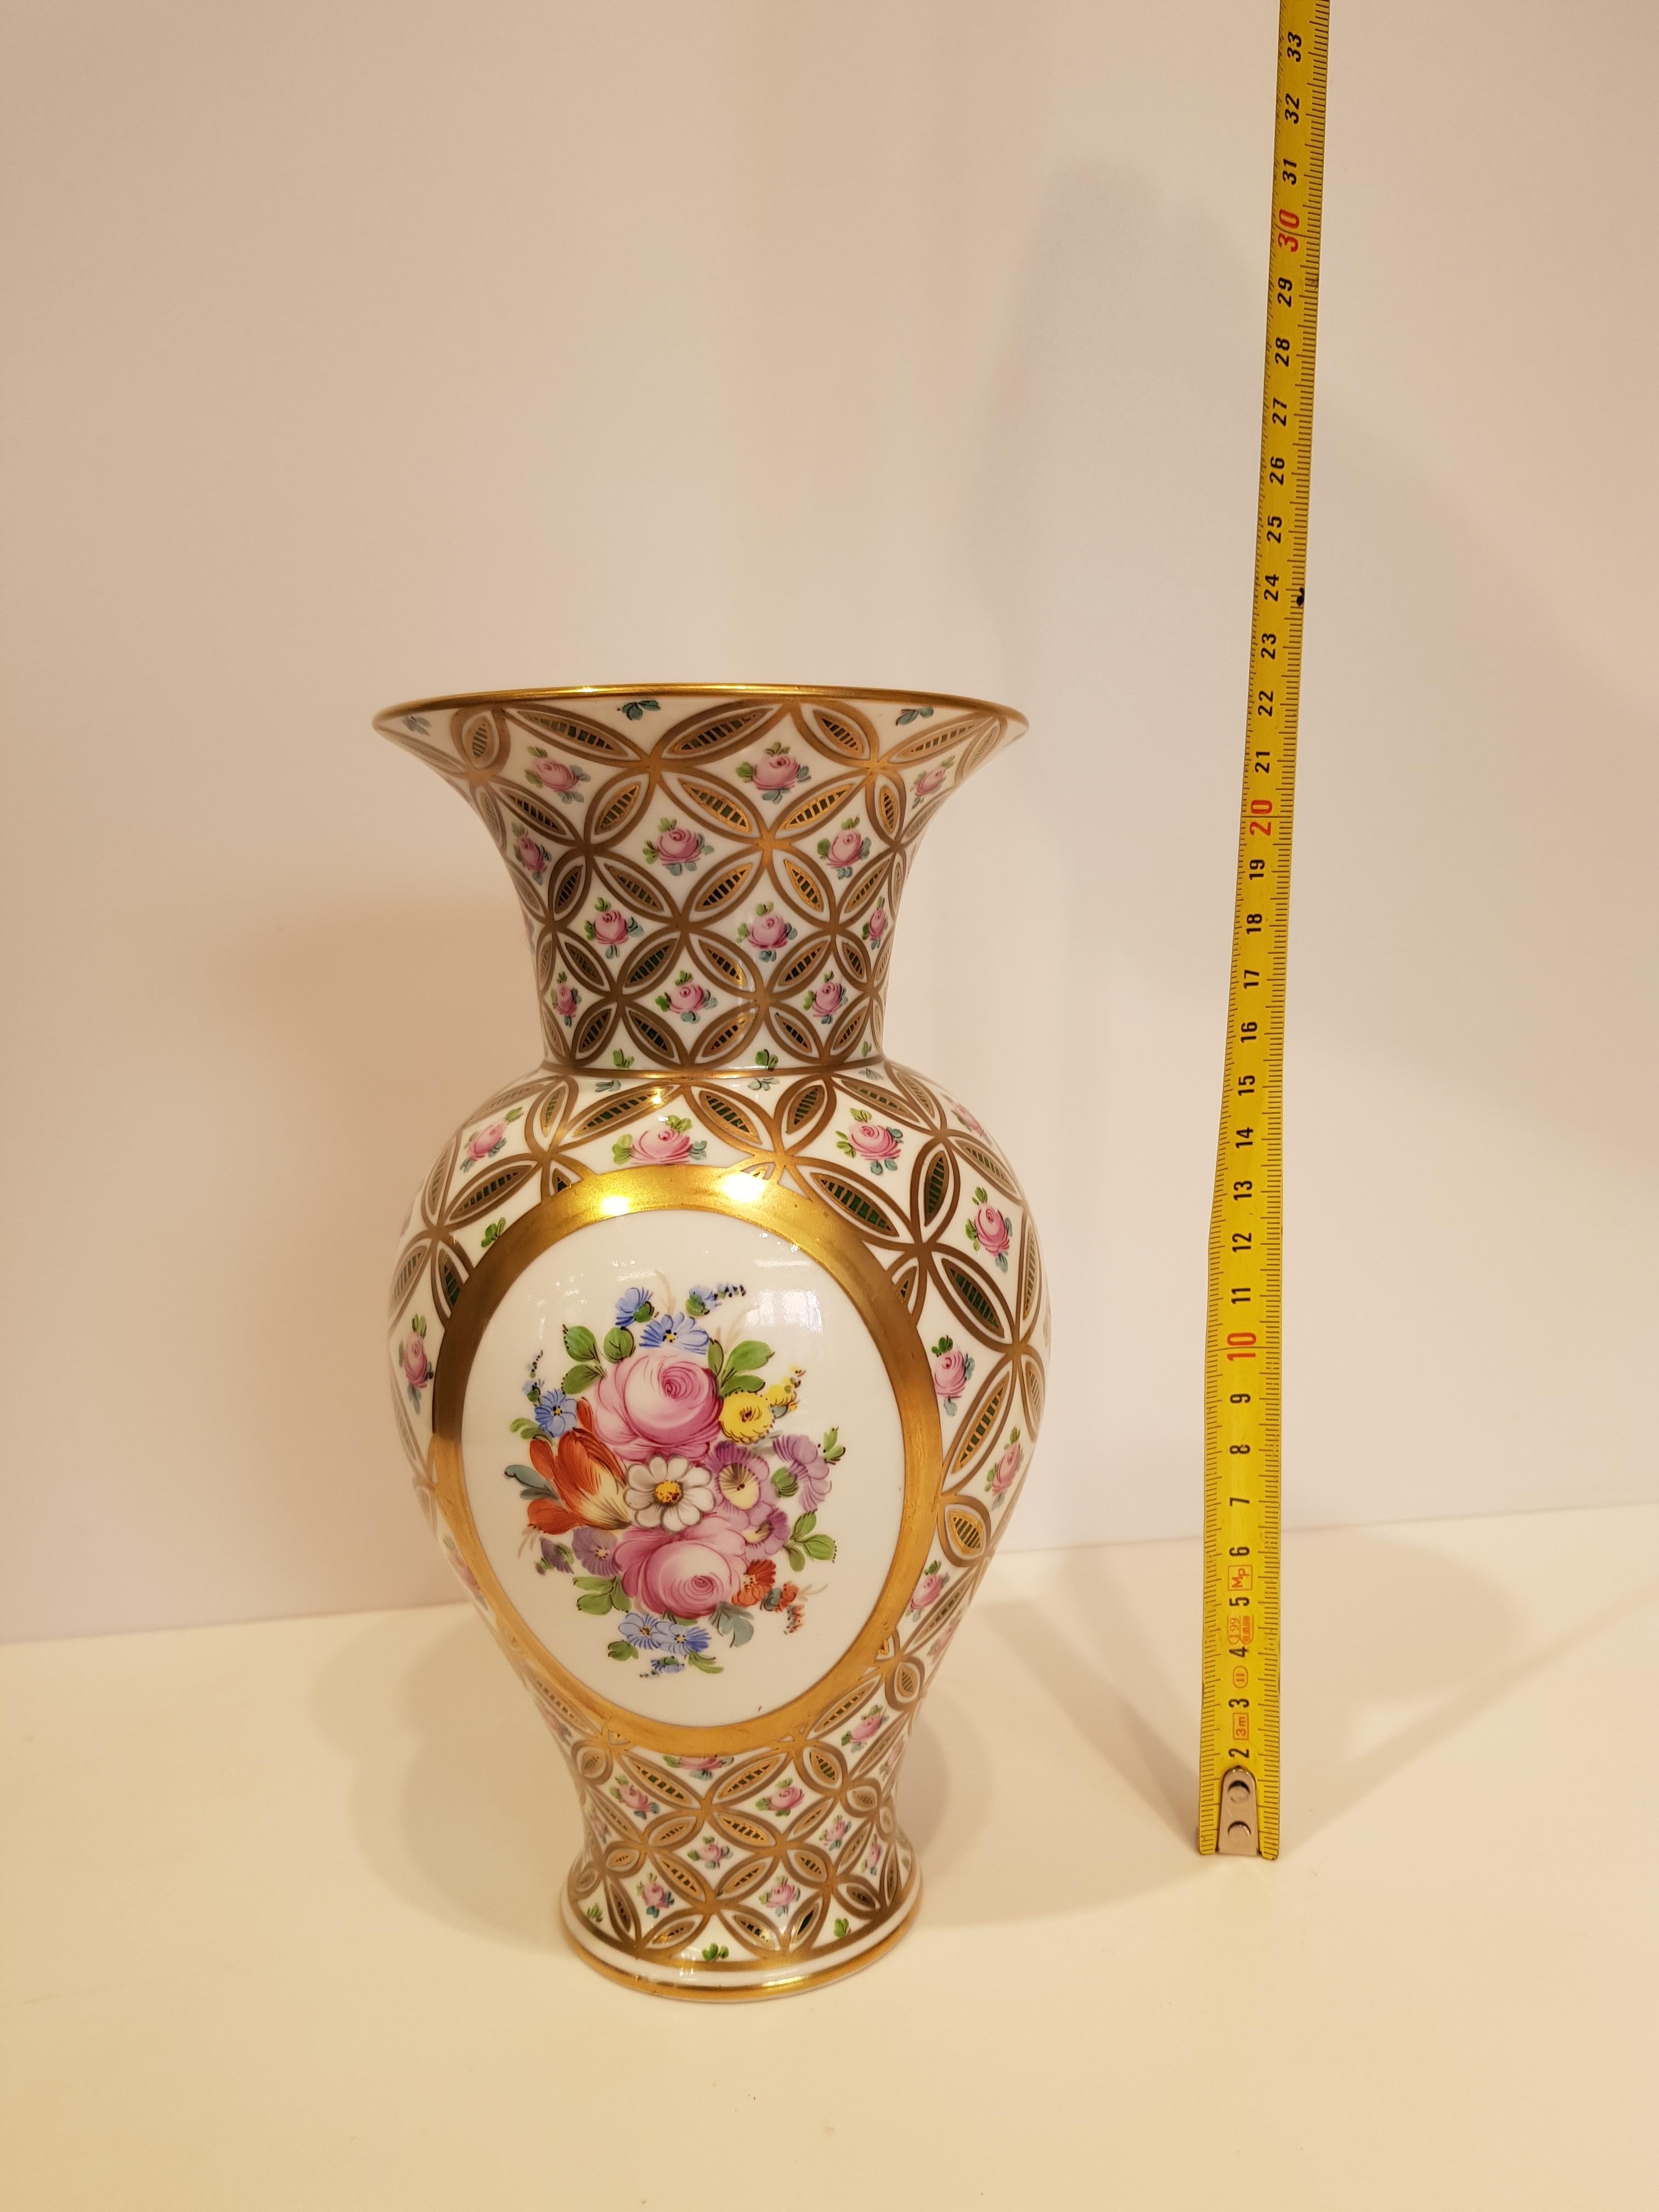 Pair of German porcelain vases from Dresden.
These vases are finely hand painted with particular geometric patterns in gold that frame the central floral motif.
Two objects of high artistic work full of details, with bright colors but at the same